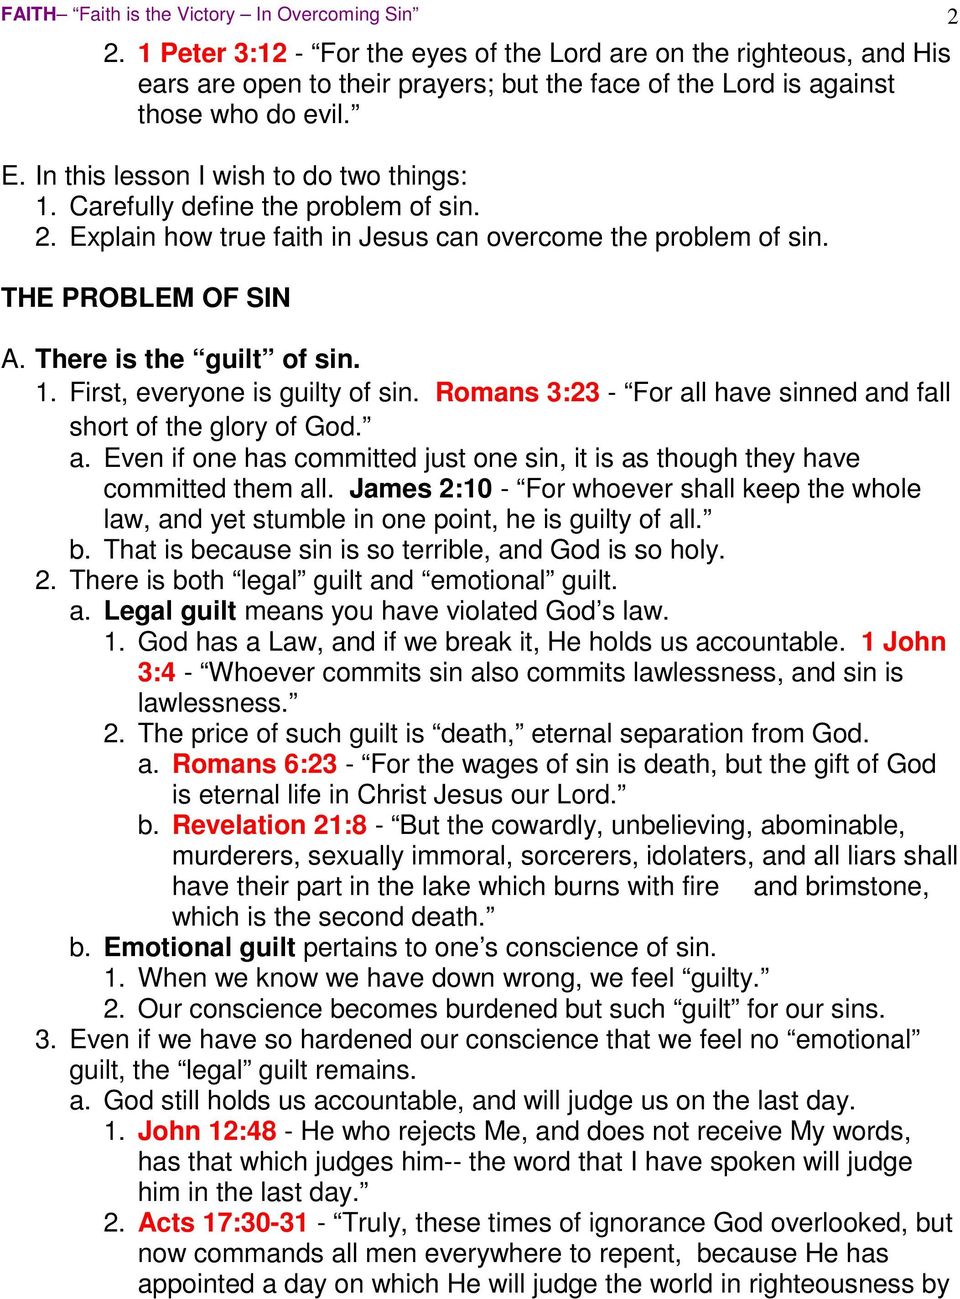 In this lesson I wish to do two things: 1. Carefully define the problem of sin. 2. Explain how true faith in Jesus can overcome the problem of sin. THE PROBLEM OF SIN A. There is the guilt of sin. 1. First, everyone is guilty of sin.